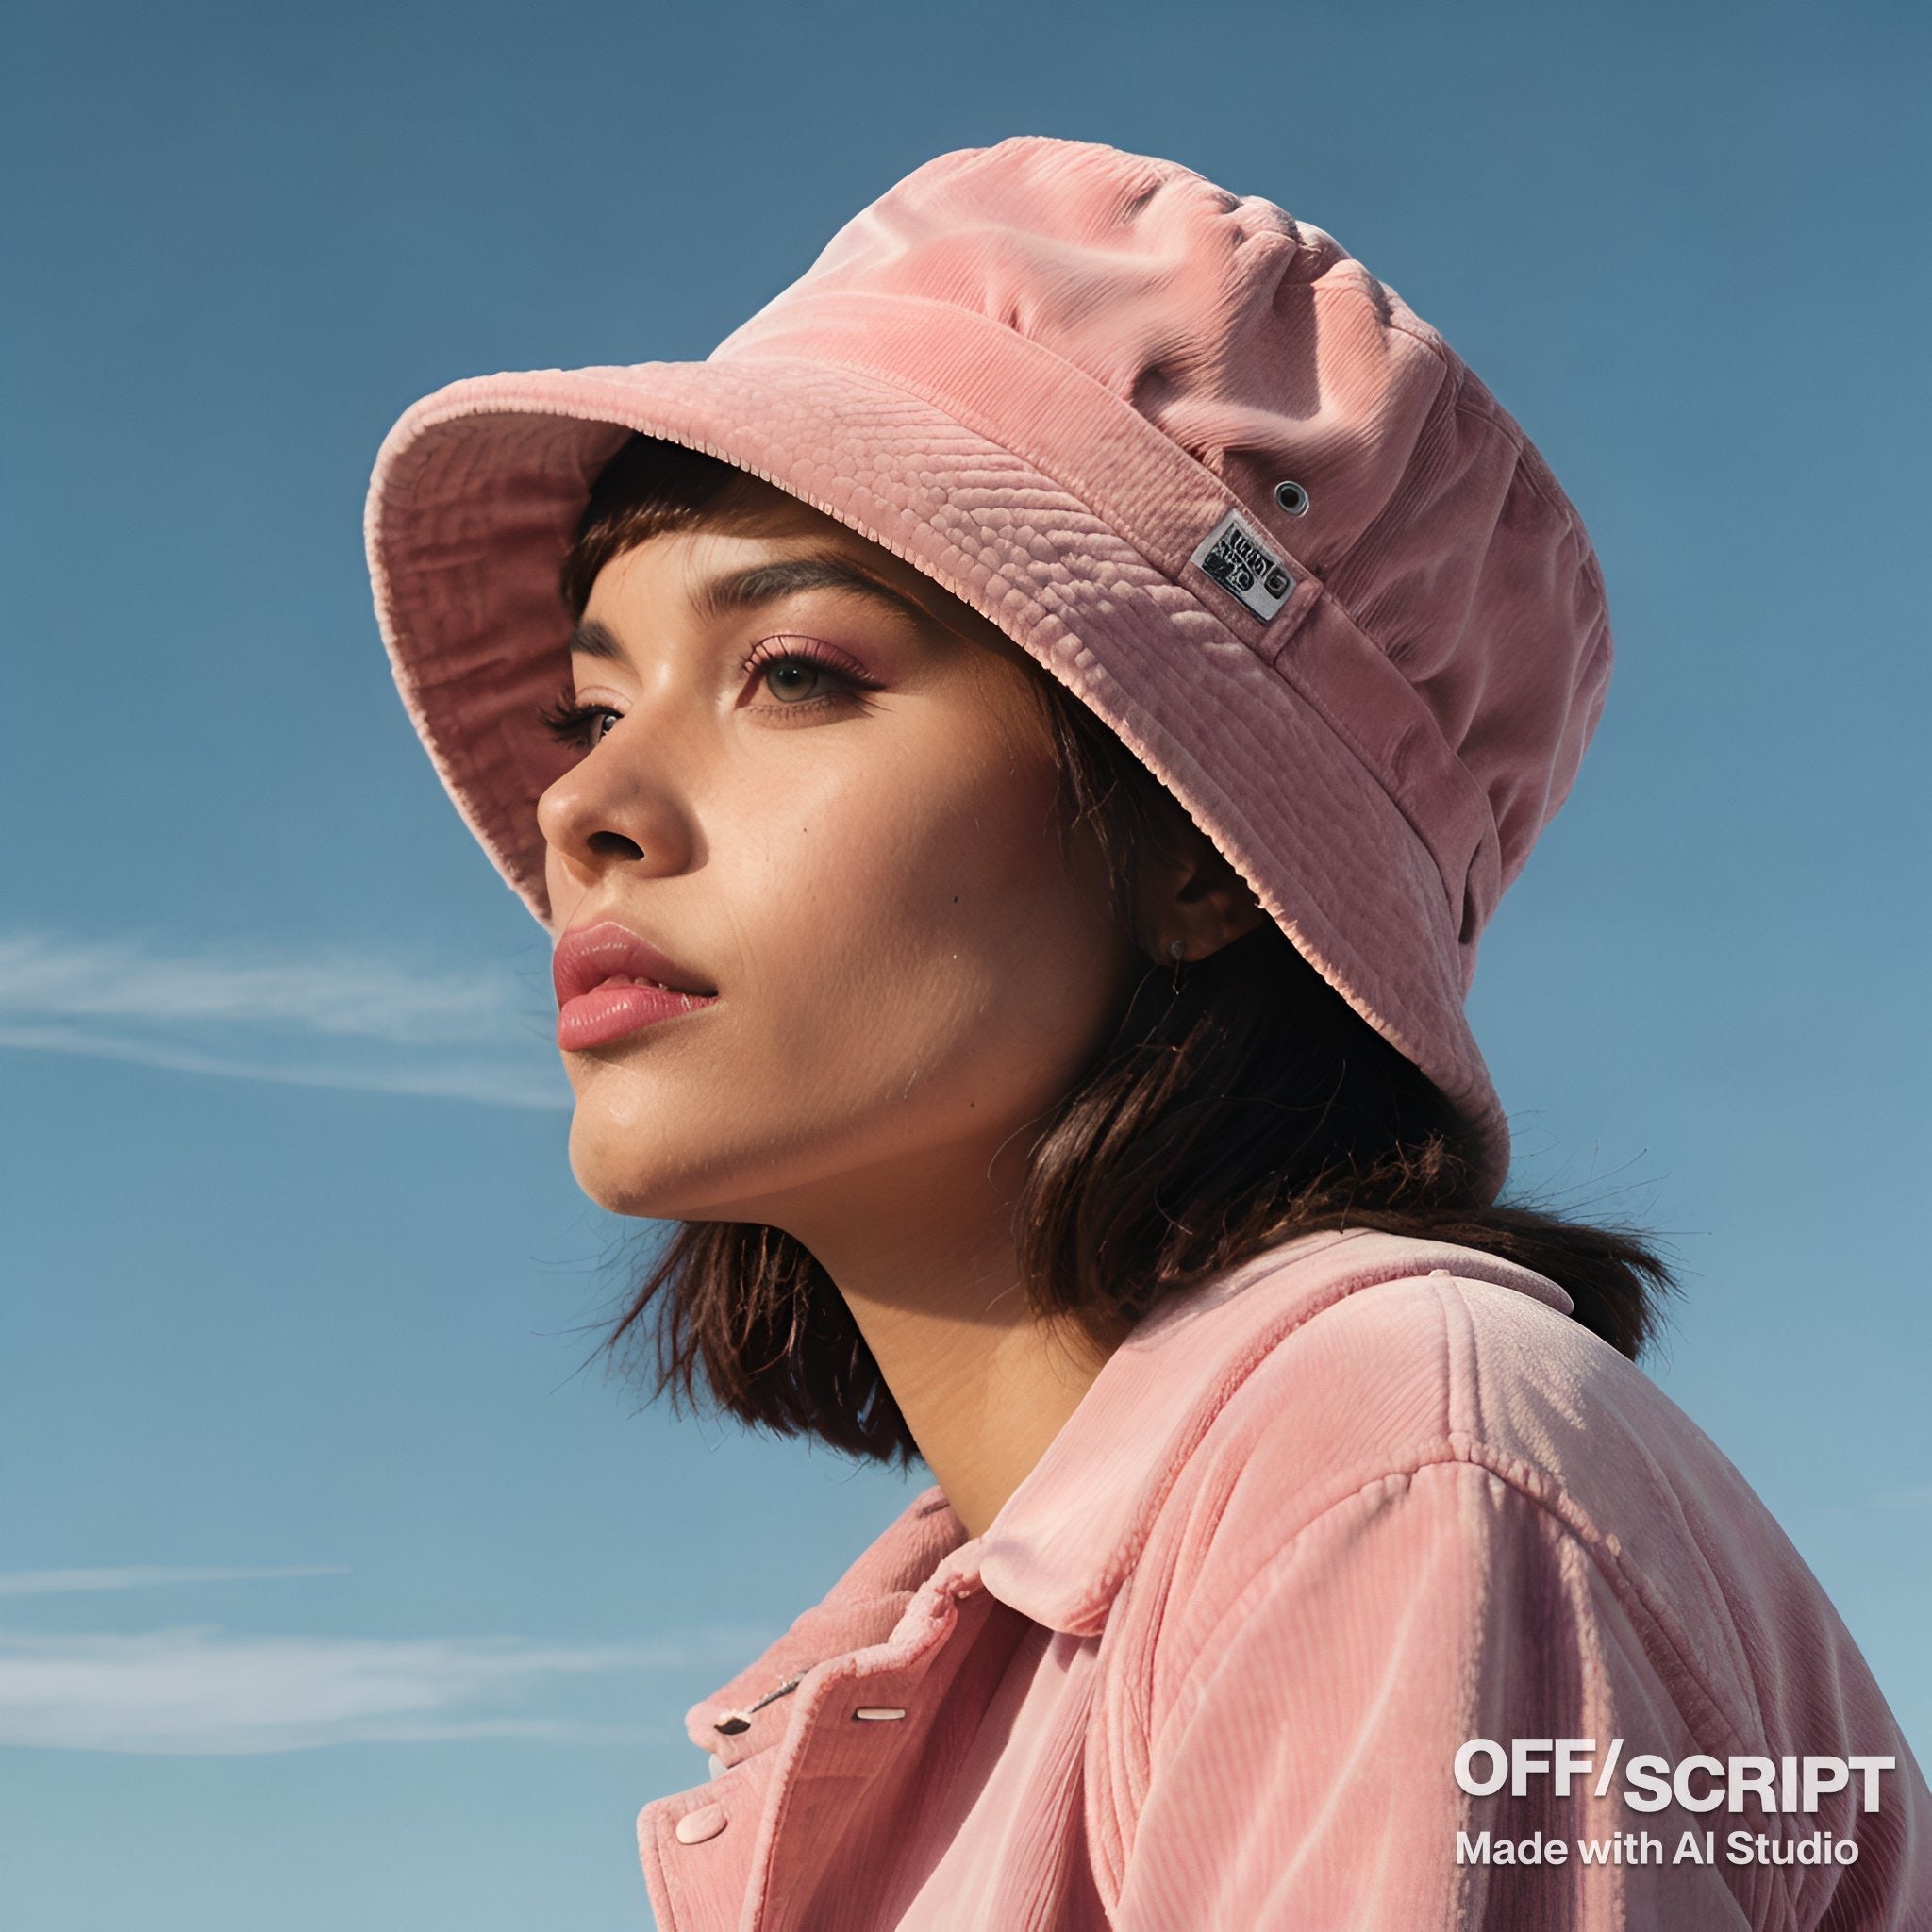 Vintage pink corduroy bucket hat. Blue sky background. Close up. Retro product shot with model posing